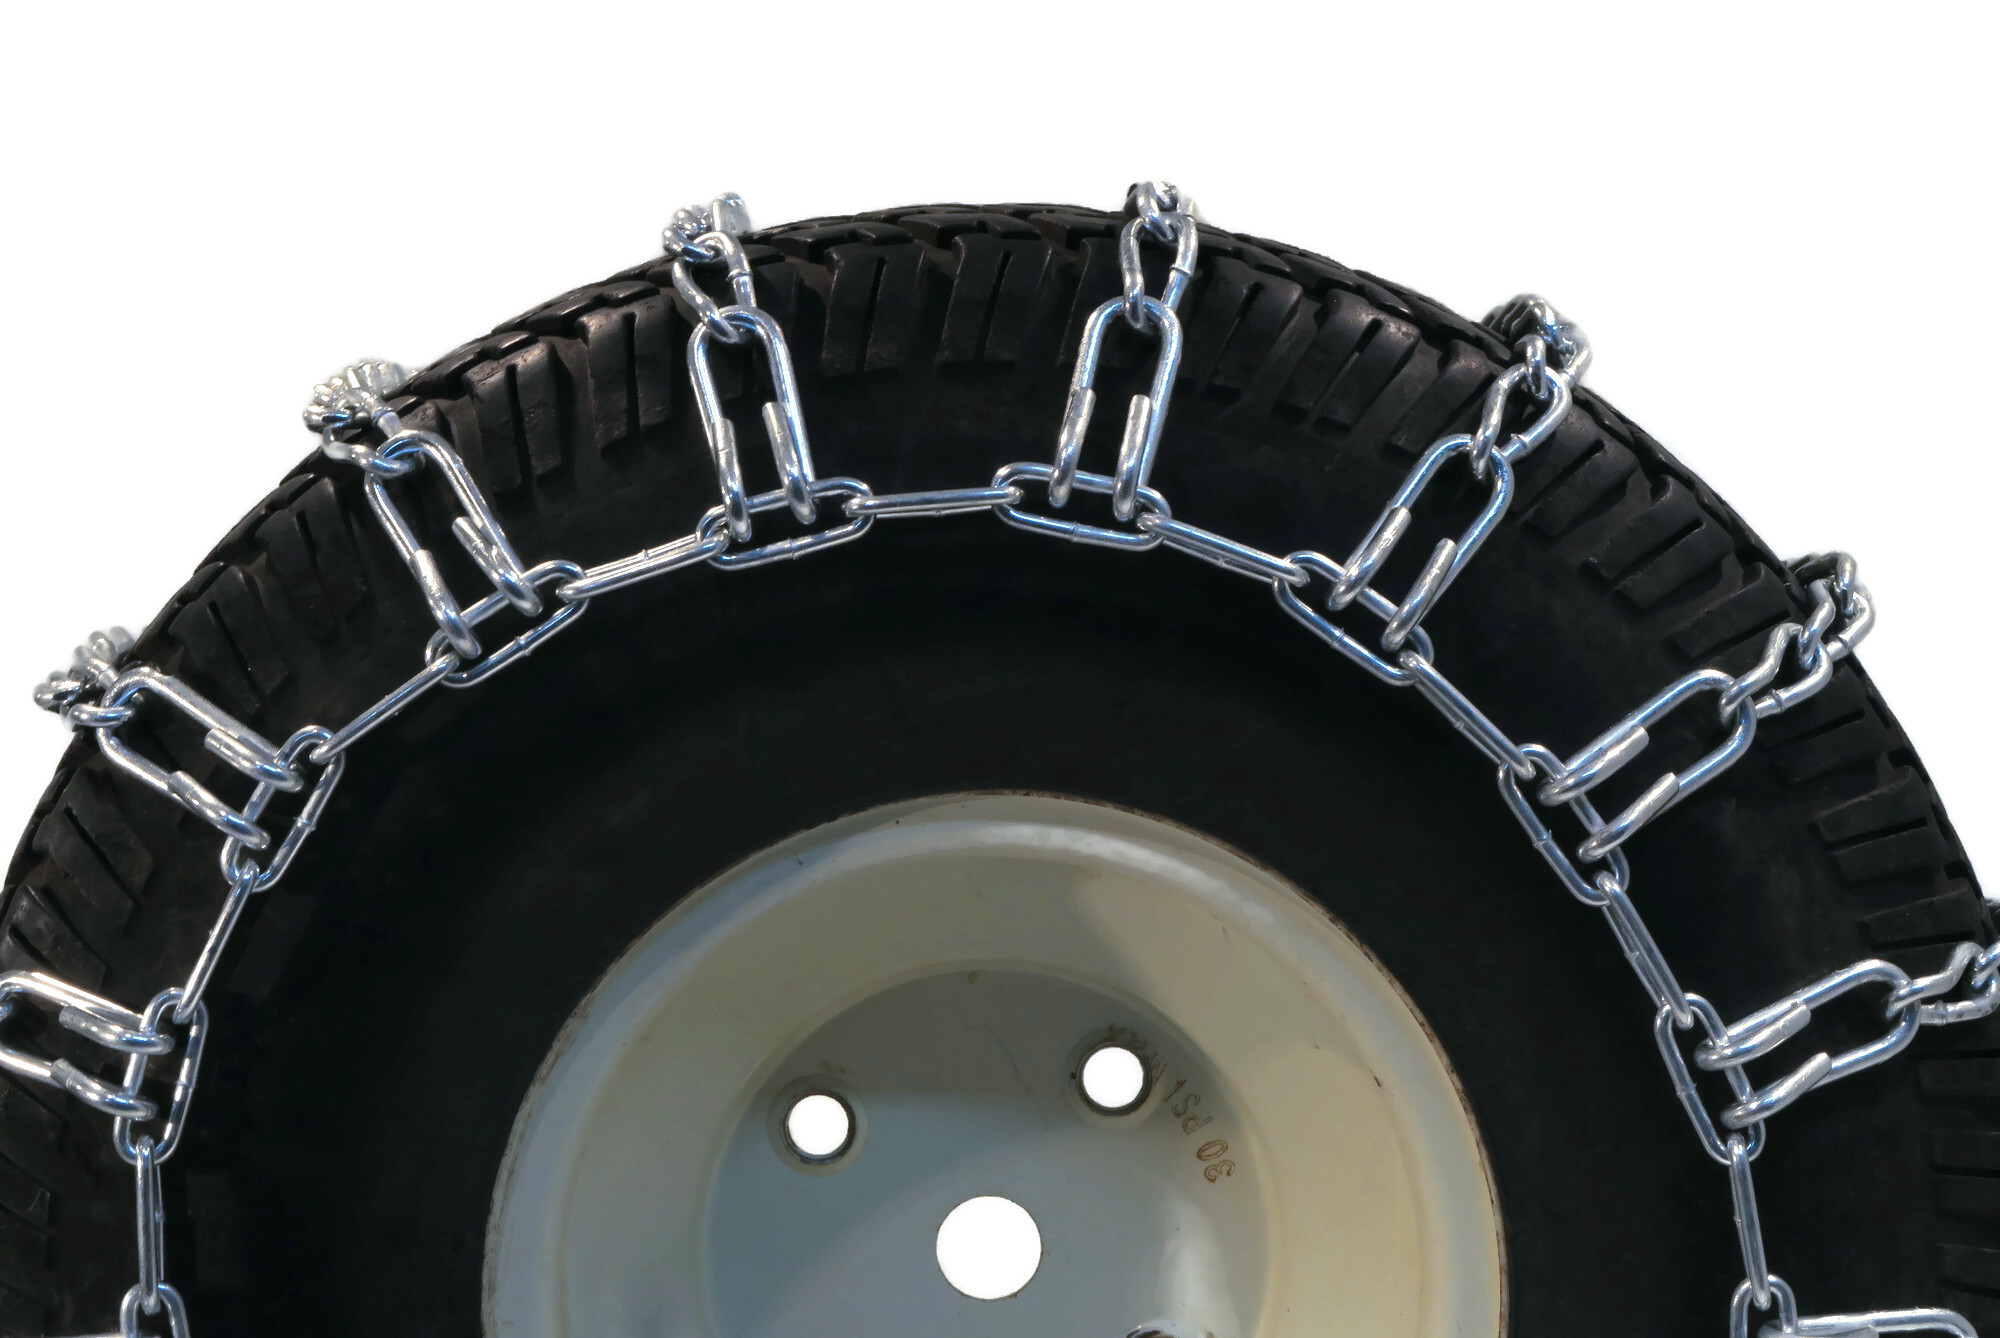 The ROP Shop | Pair 4 Link Tire Chains 29x12x15 for Sears Craftsman Lawn Mower Tractor Rider - image 4 of 6